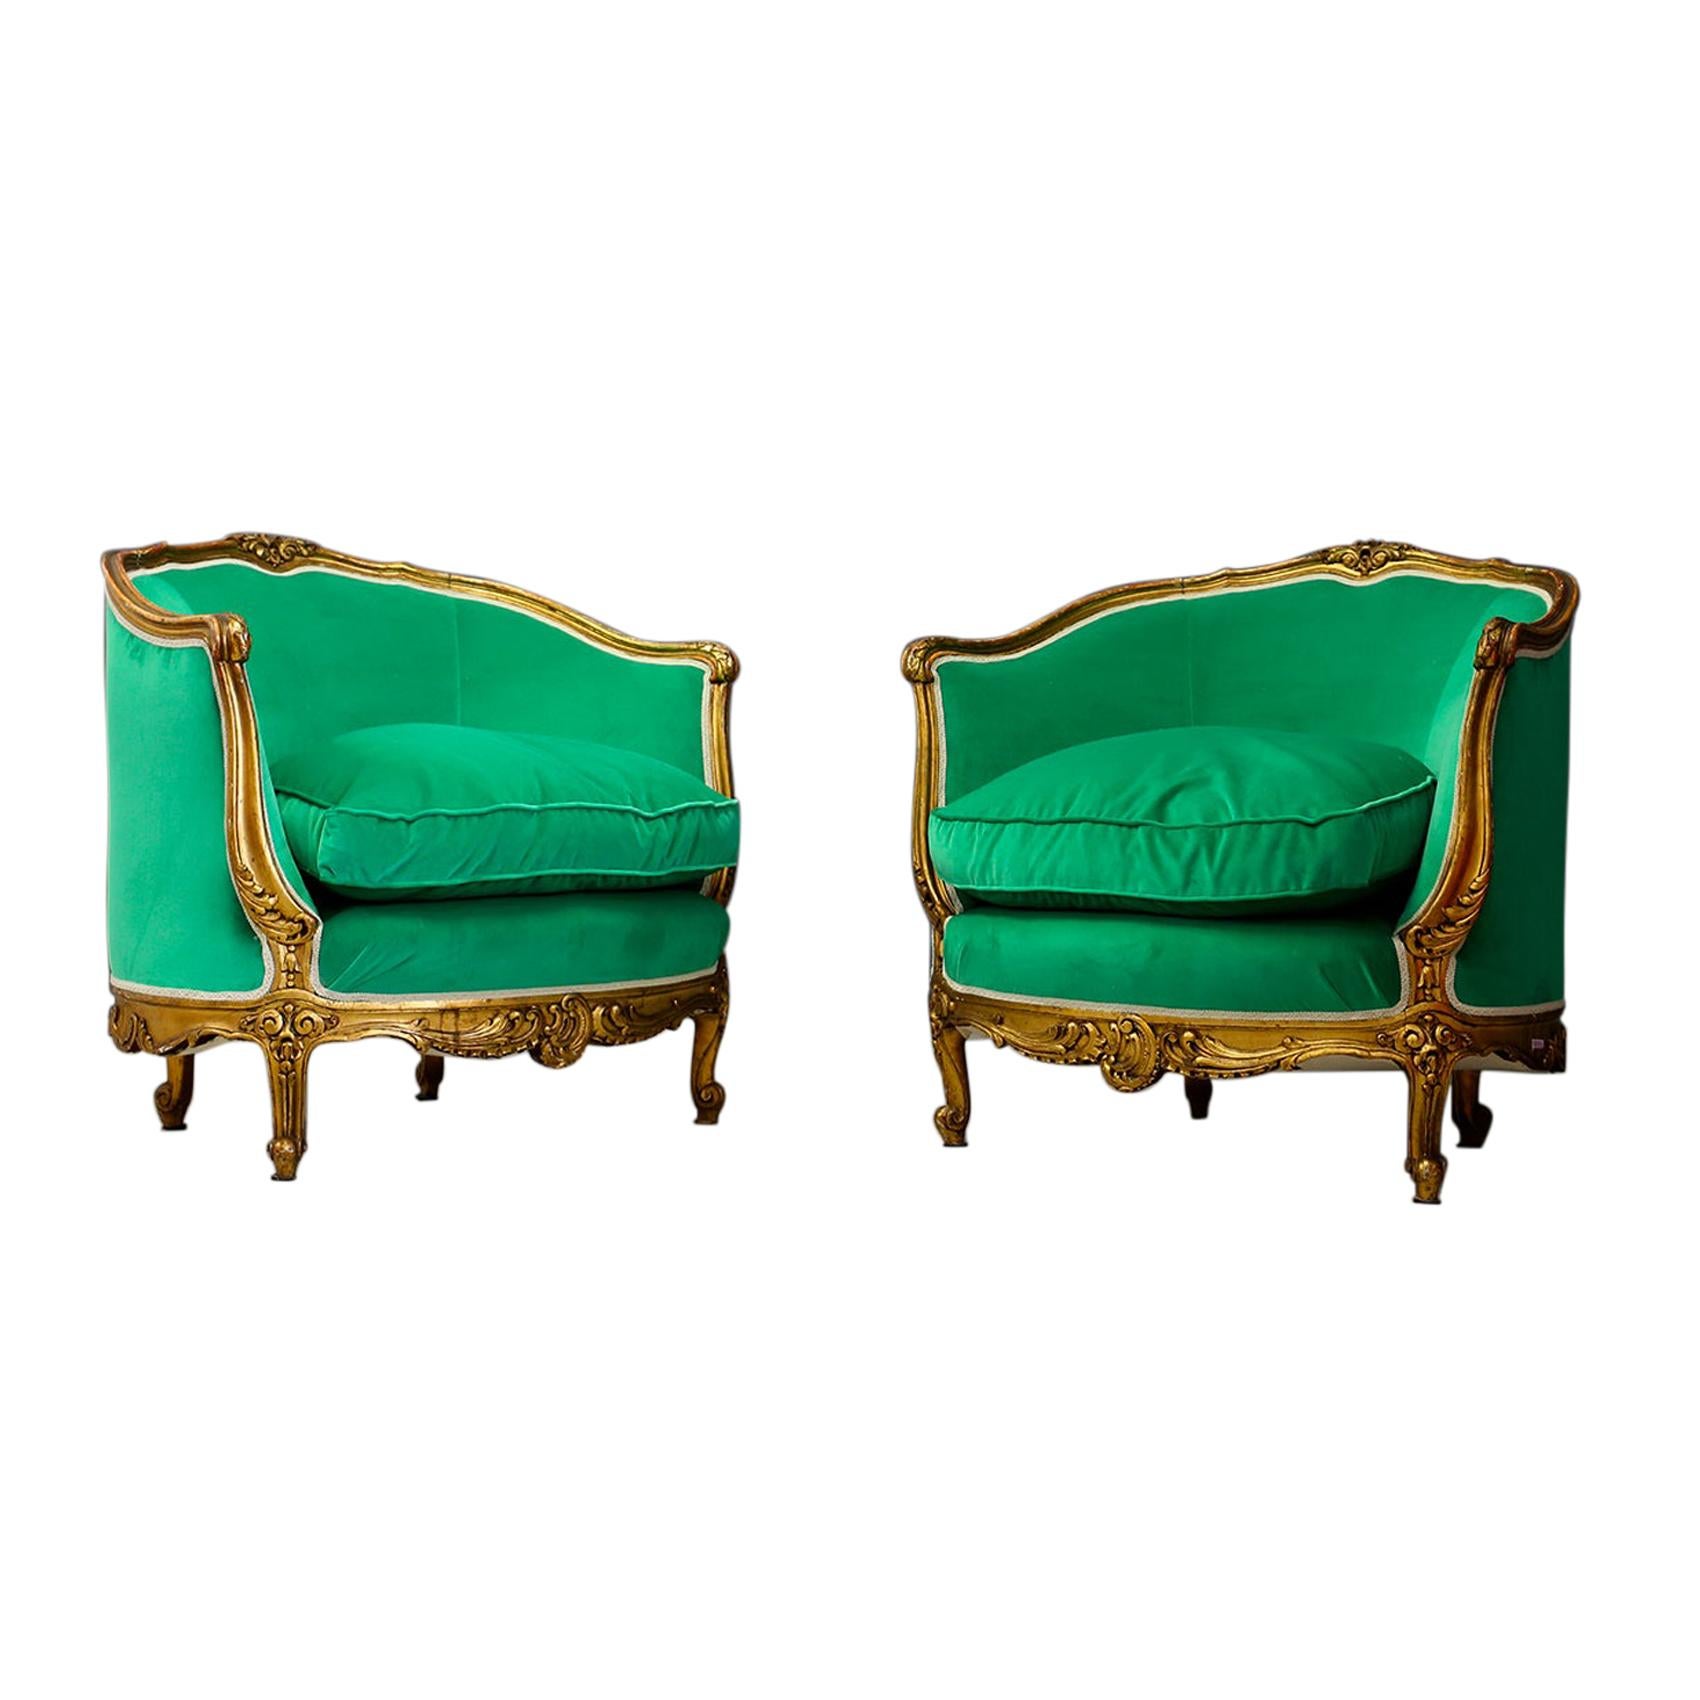 Pair of Armchairs Green Late 19th Century Louis XV Style in Gilded Carved Wood